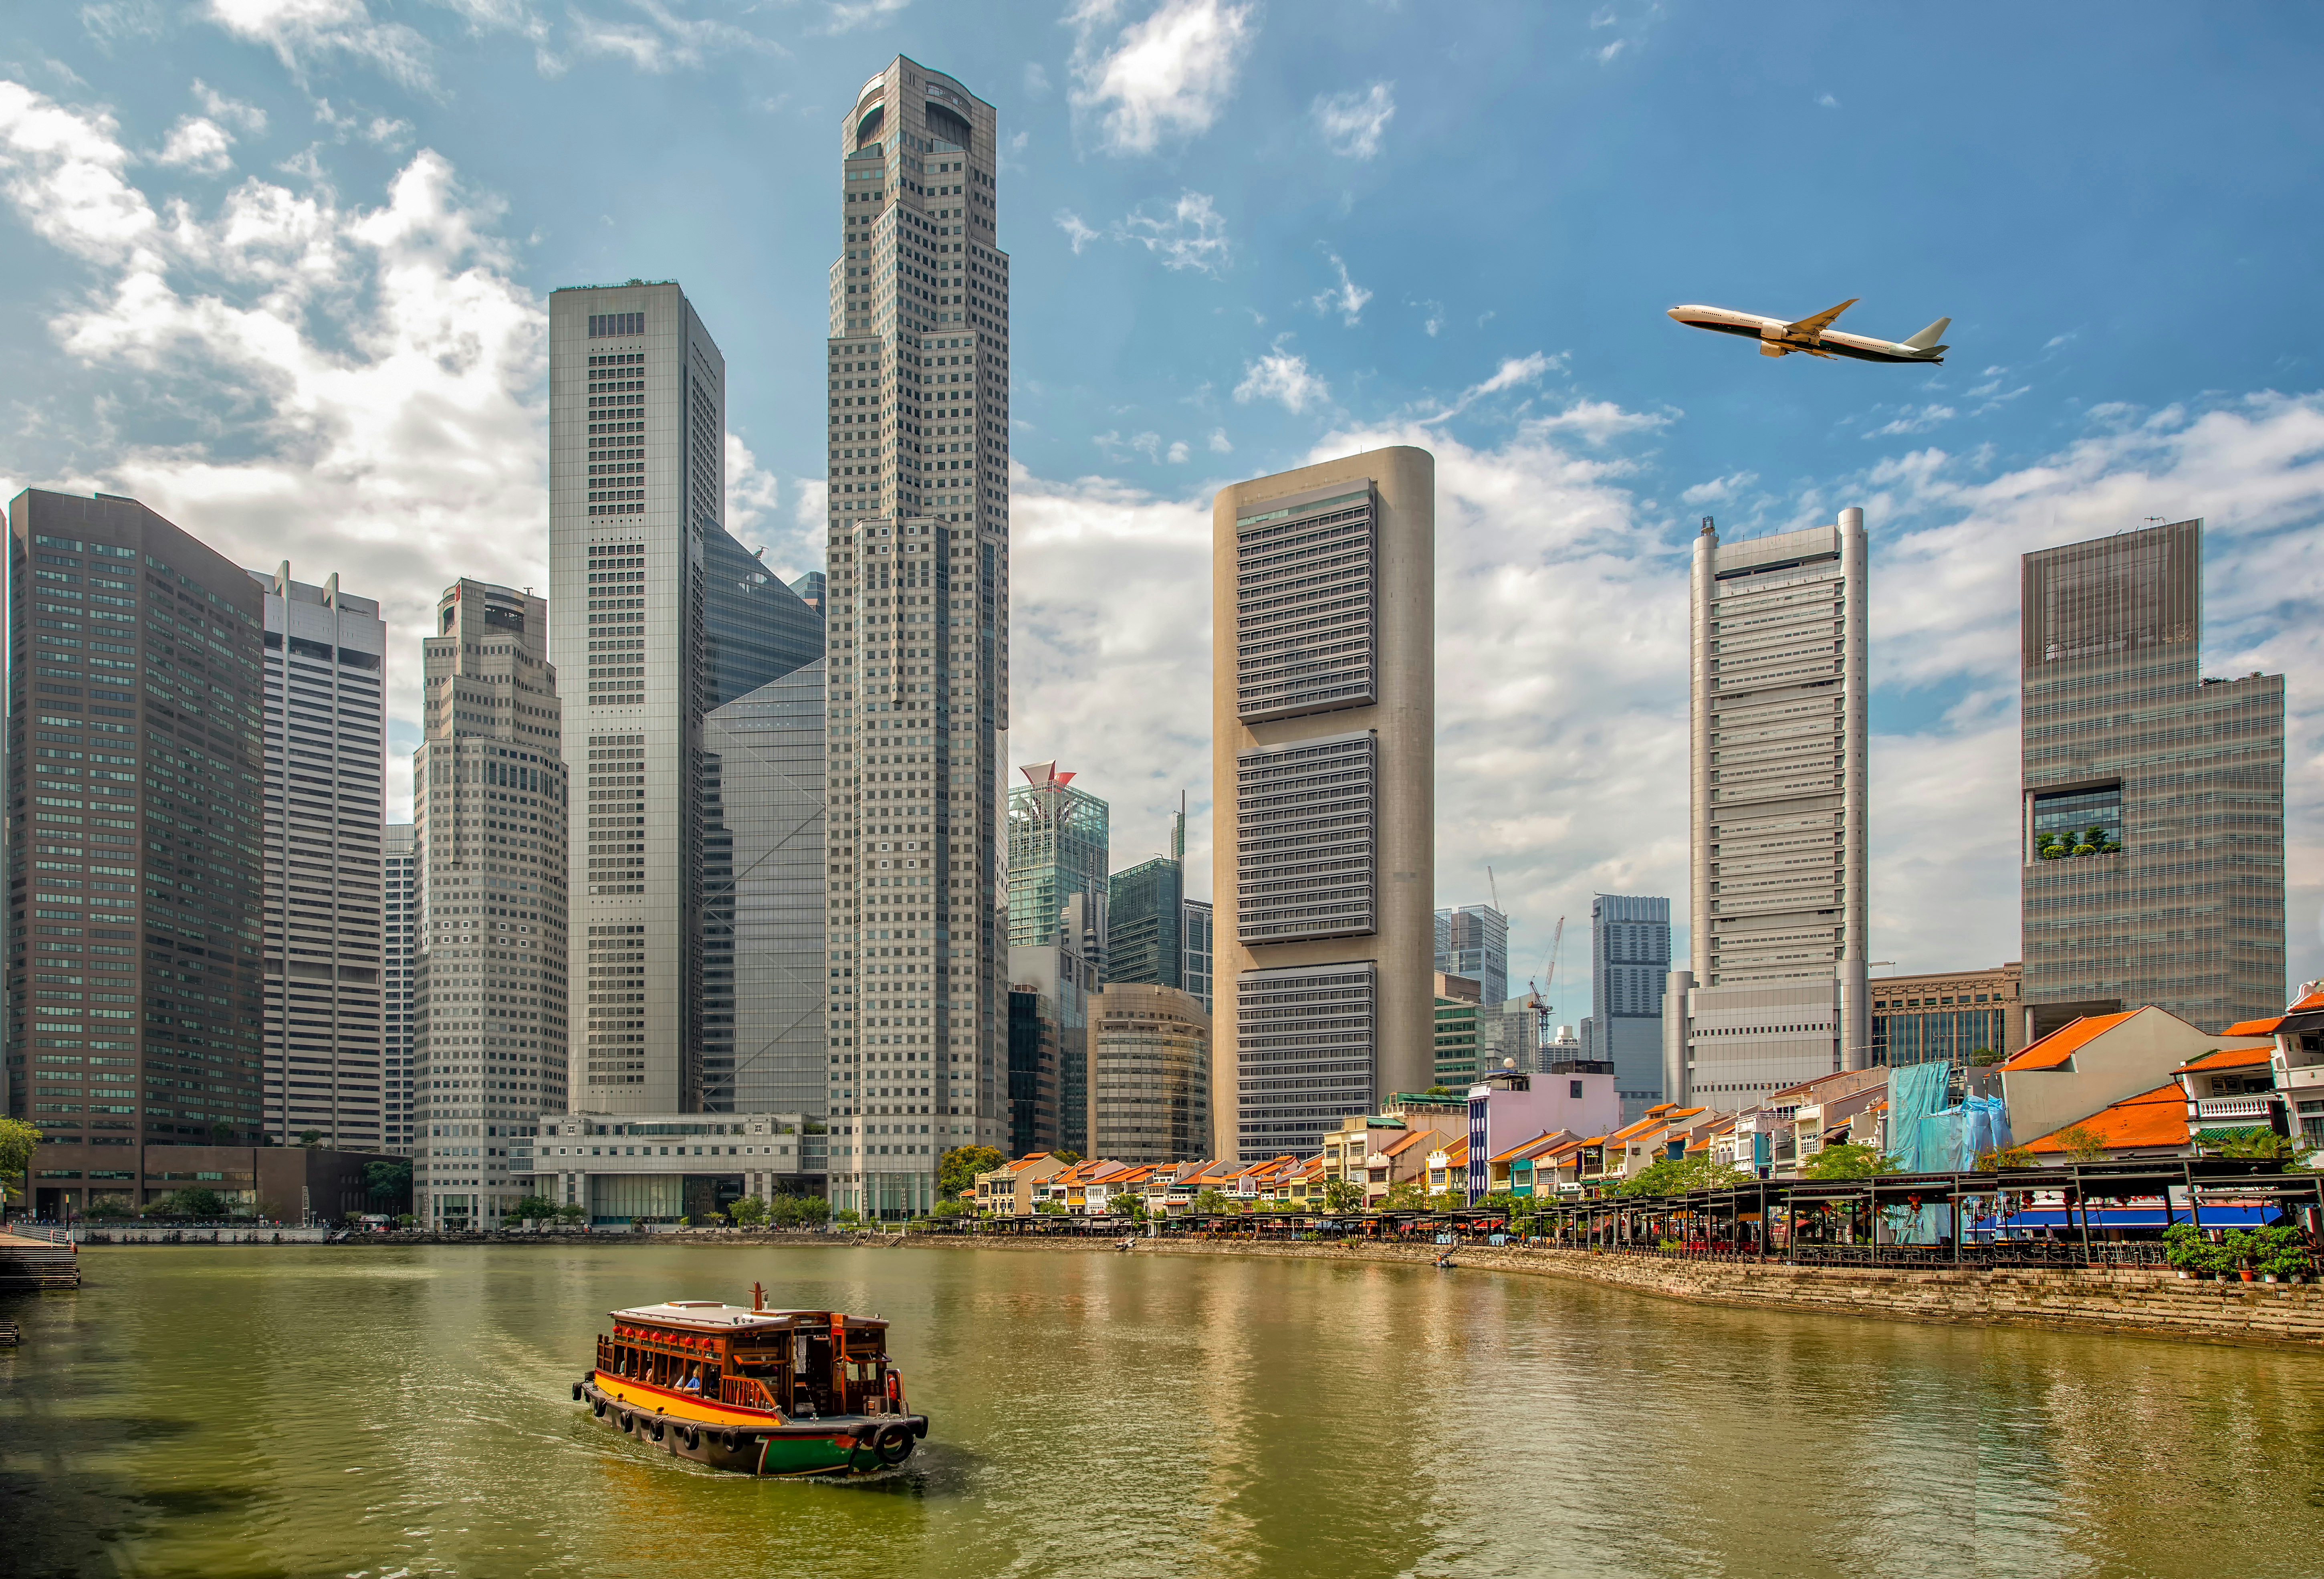 A plane flies over downtown Singapore's skyline with a ferry on the river below.